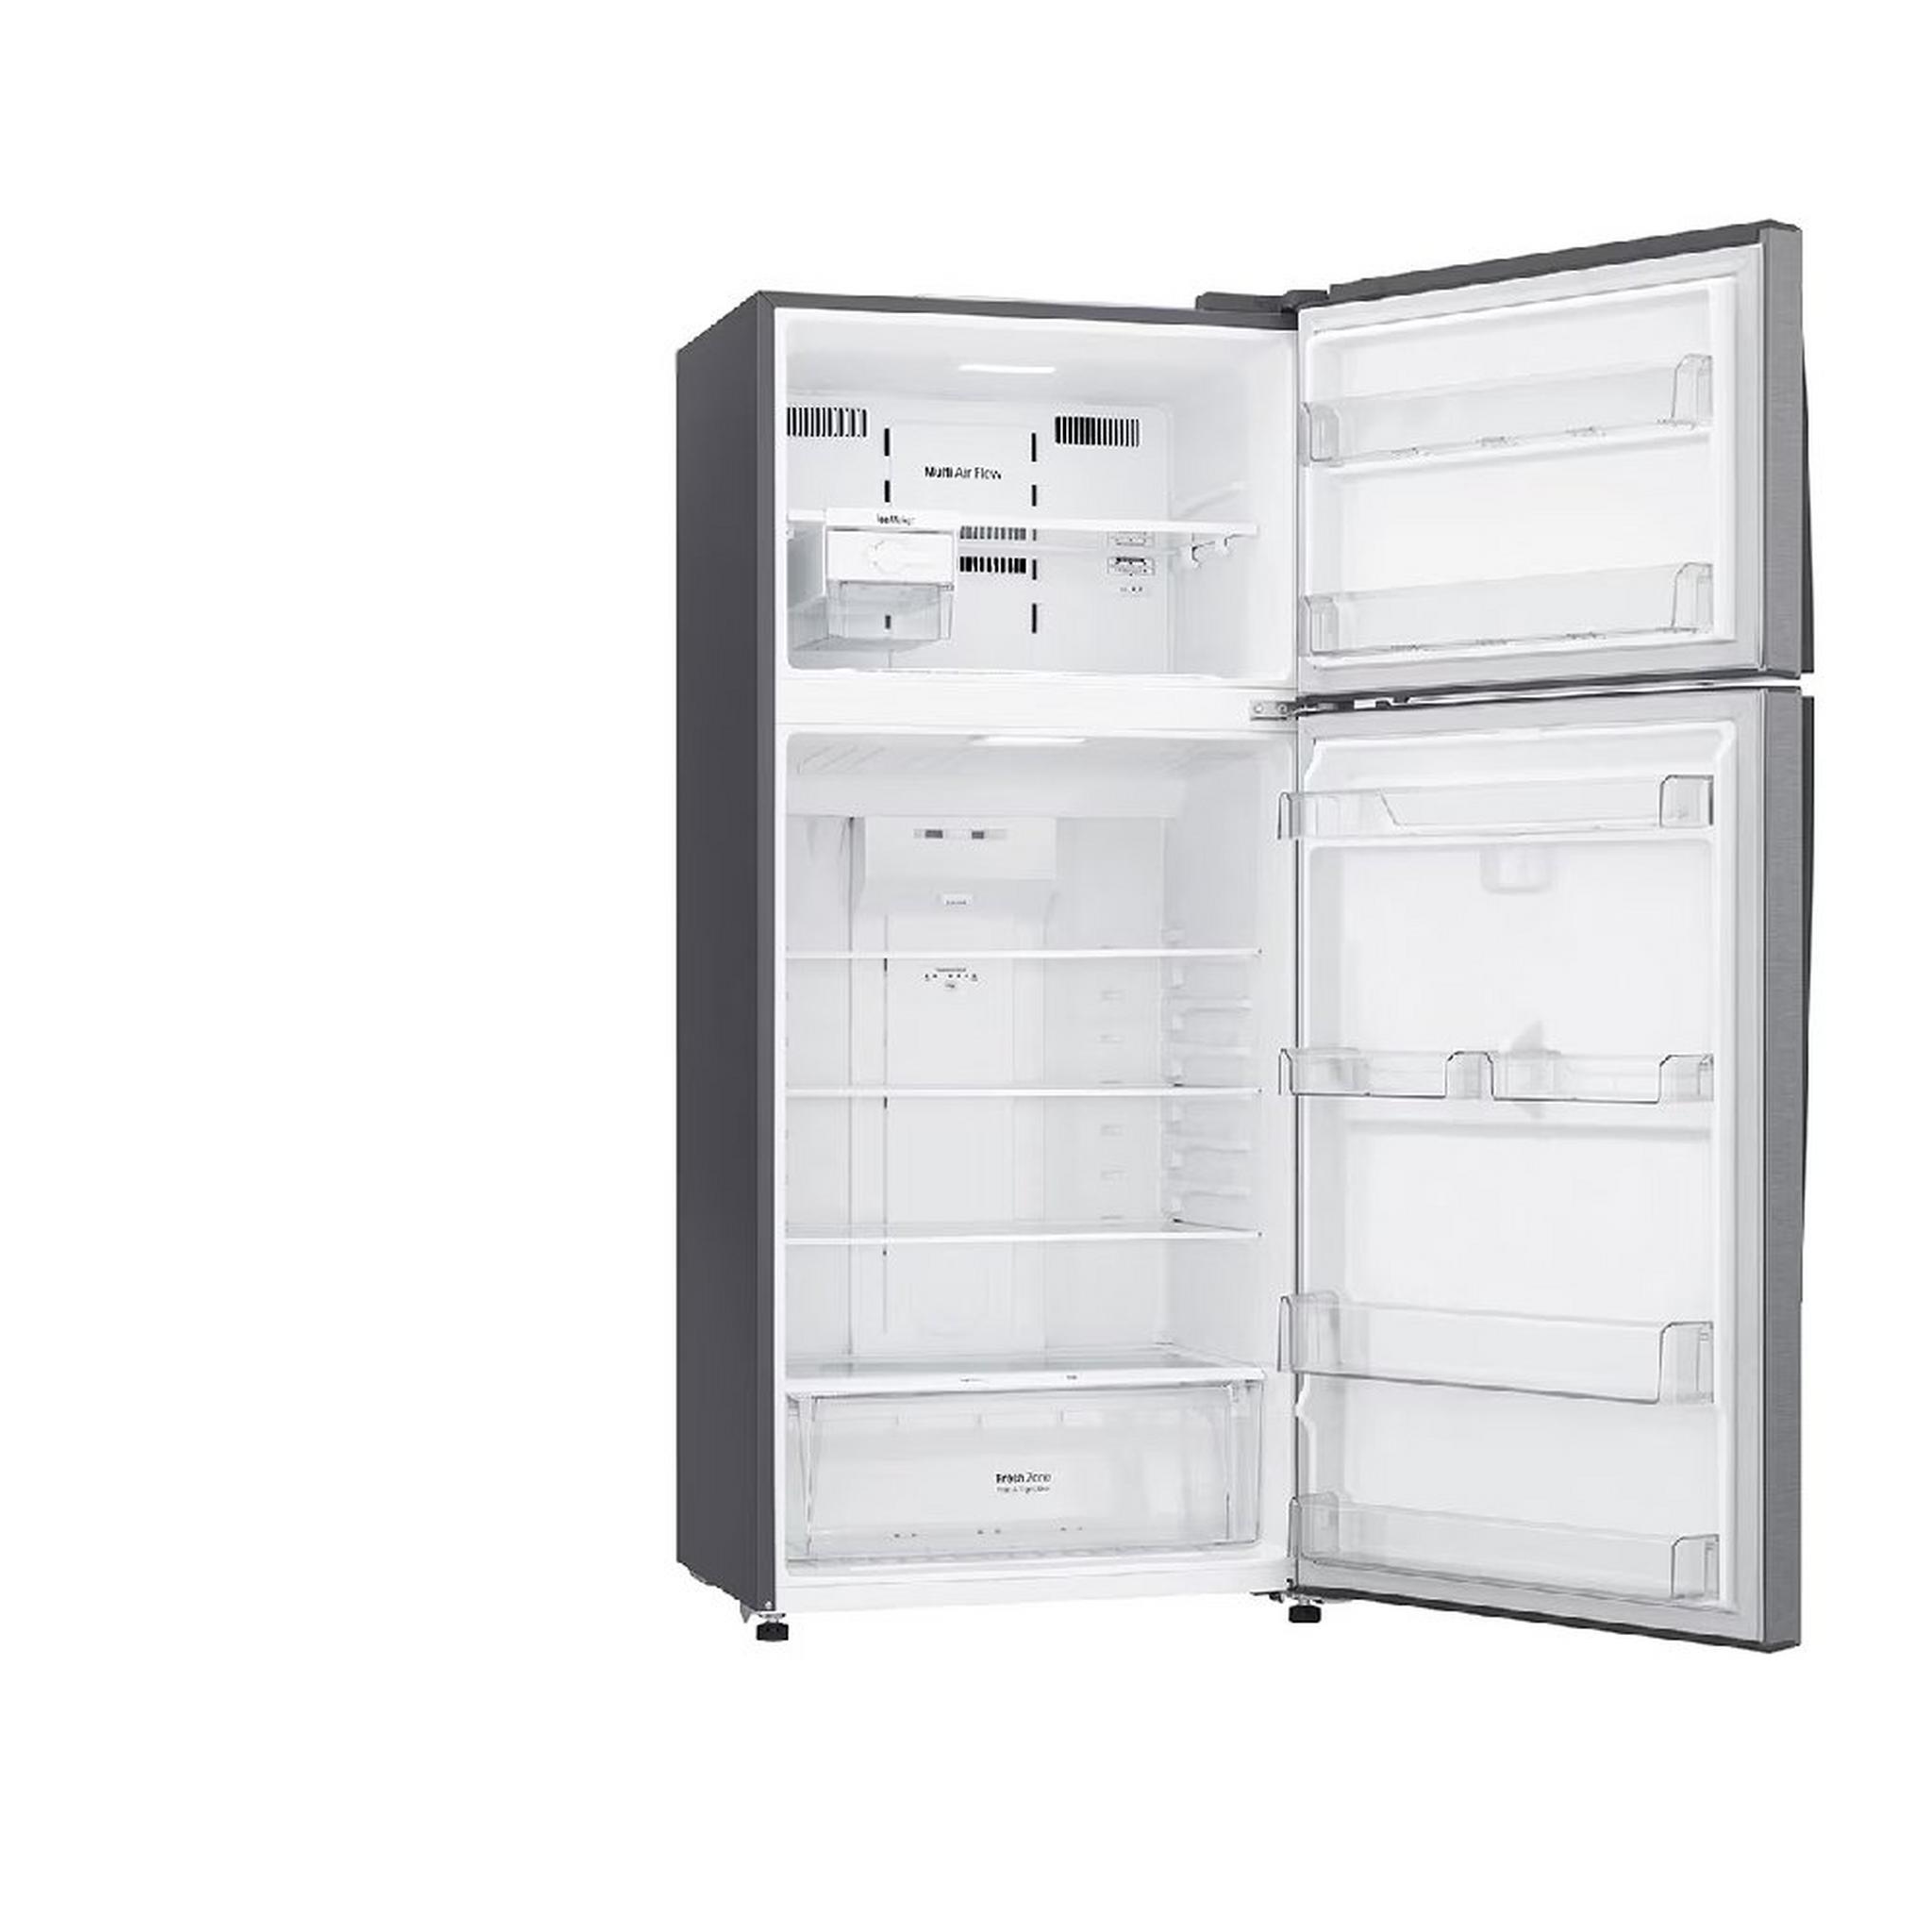 LG Top Mount Refrigerator, 18 CFT, 509L, GN-C782HQCL – Silver